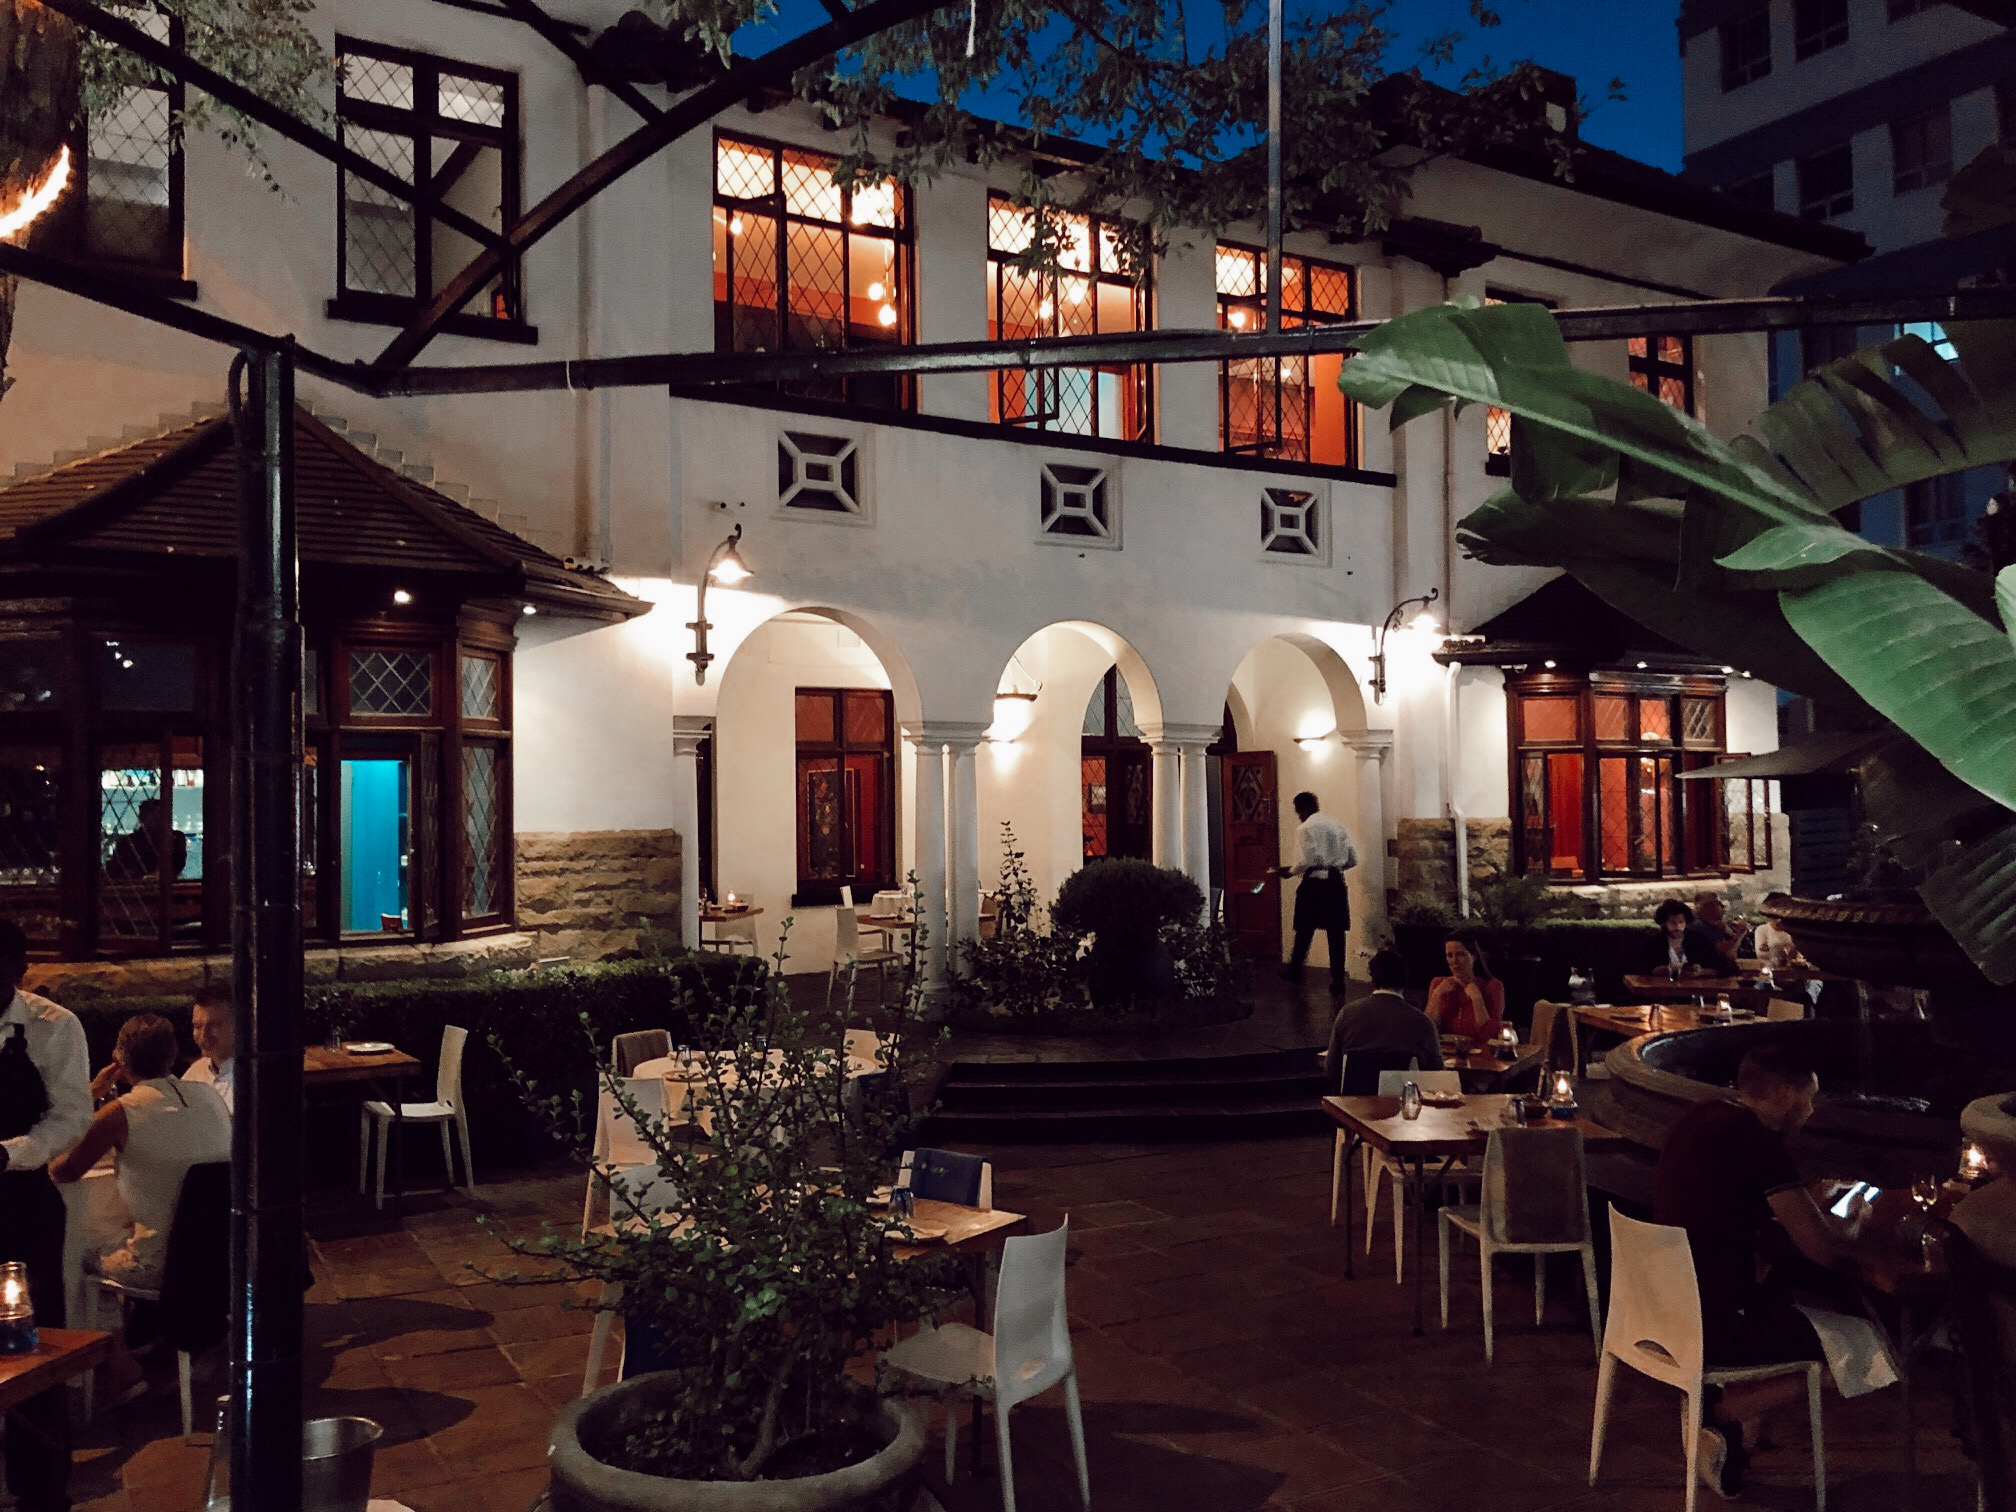 La Mouette - a well-established and fully-licensed restaurant based in Sea Point, one of Cape Town’s most vibrant and picturesque seaside suburbs, is seeking a new owner.